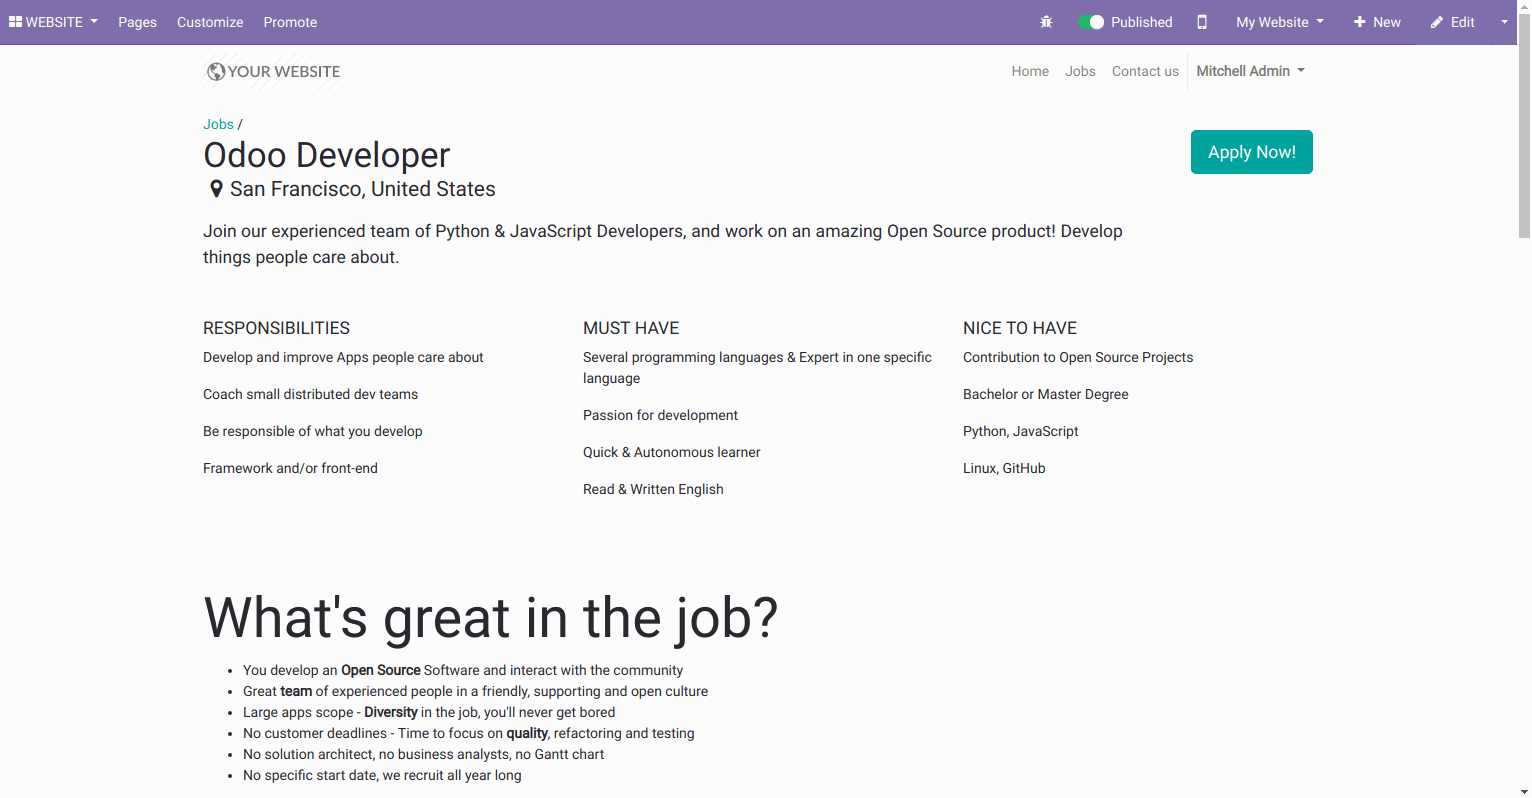 Publish job position on website A user can publish a job position on a website and change the look and feel using the Edit button.  It shows the job position name, relevant location, and a description about the job position. Website visitors can see this job post and apply.